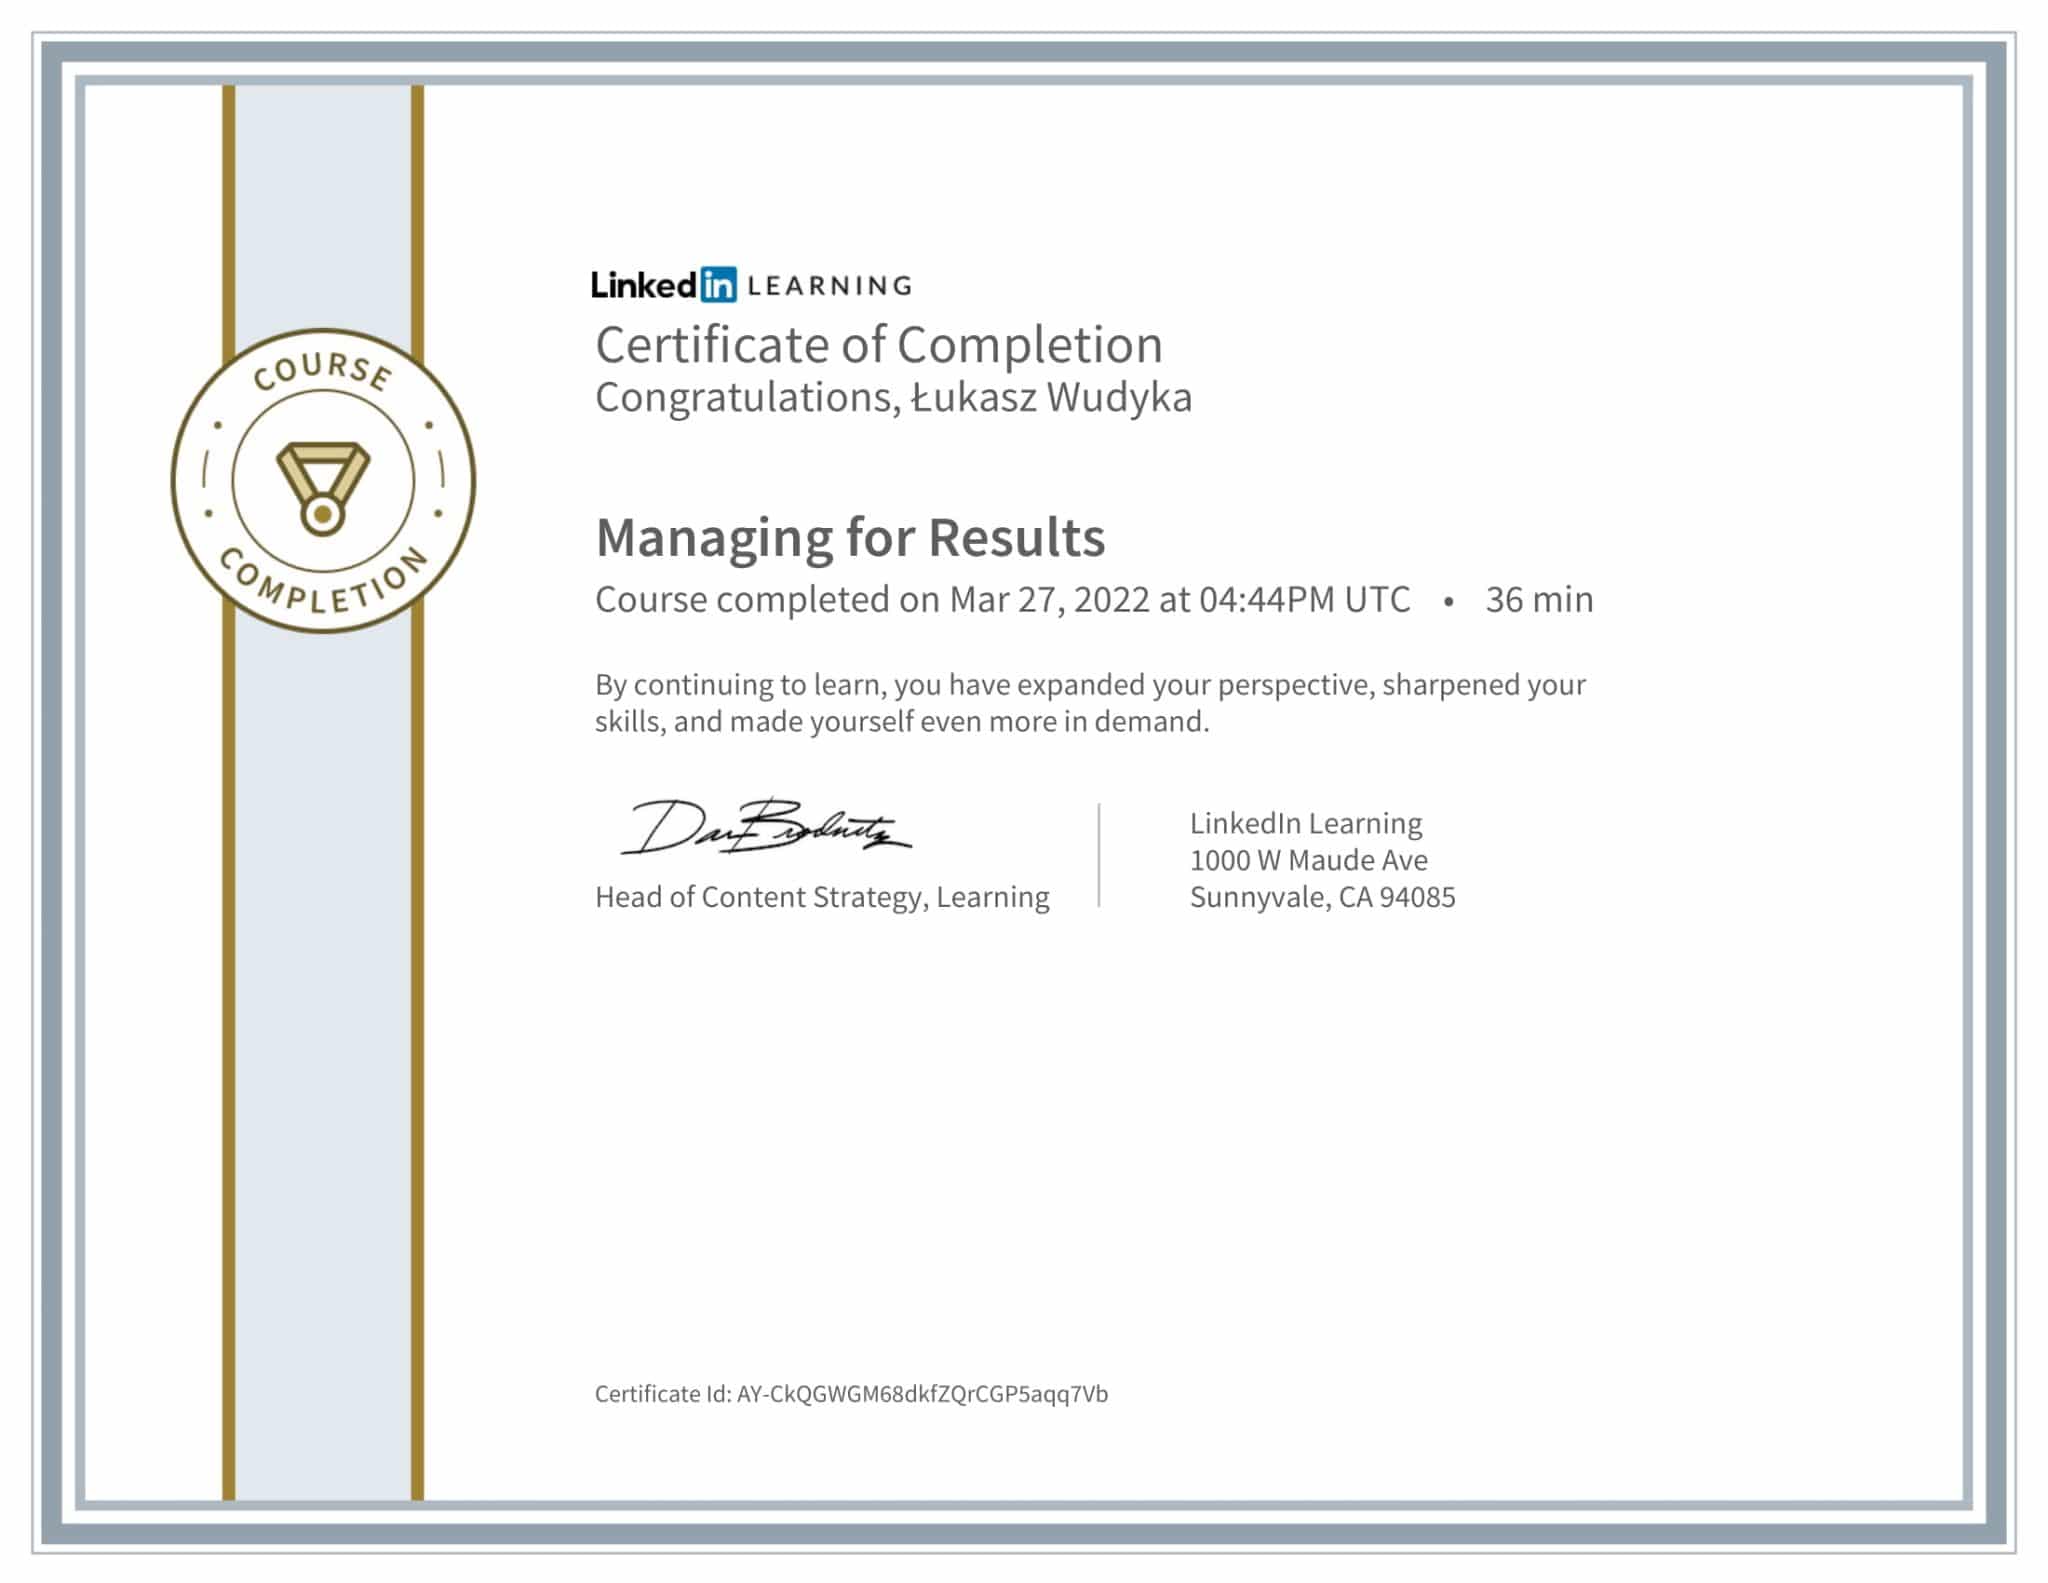 CertificateOfCompletion_Managing for Results-1